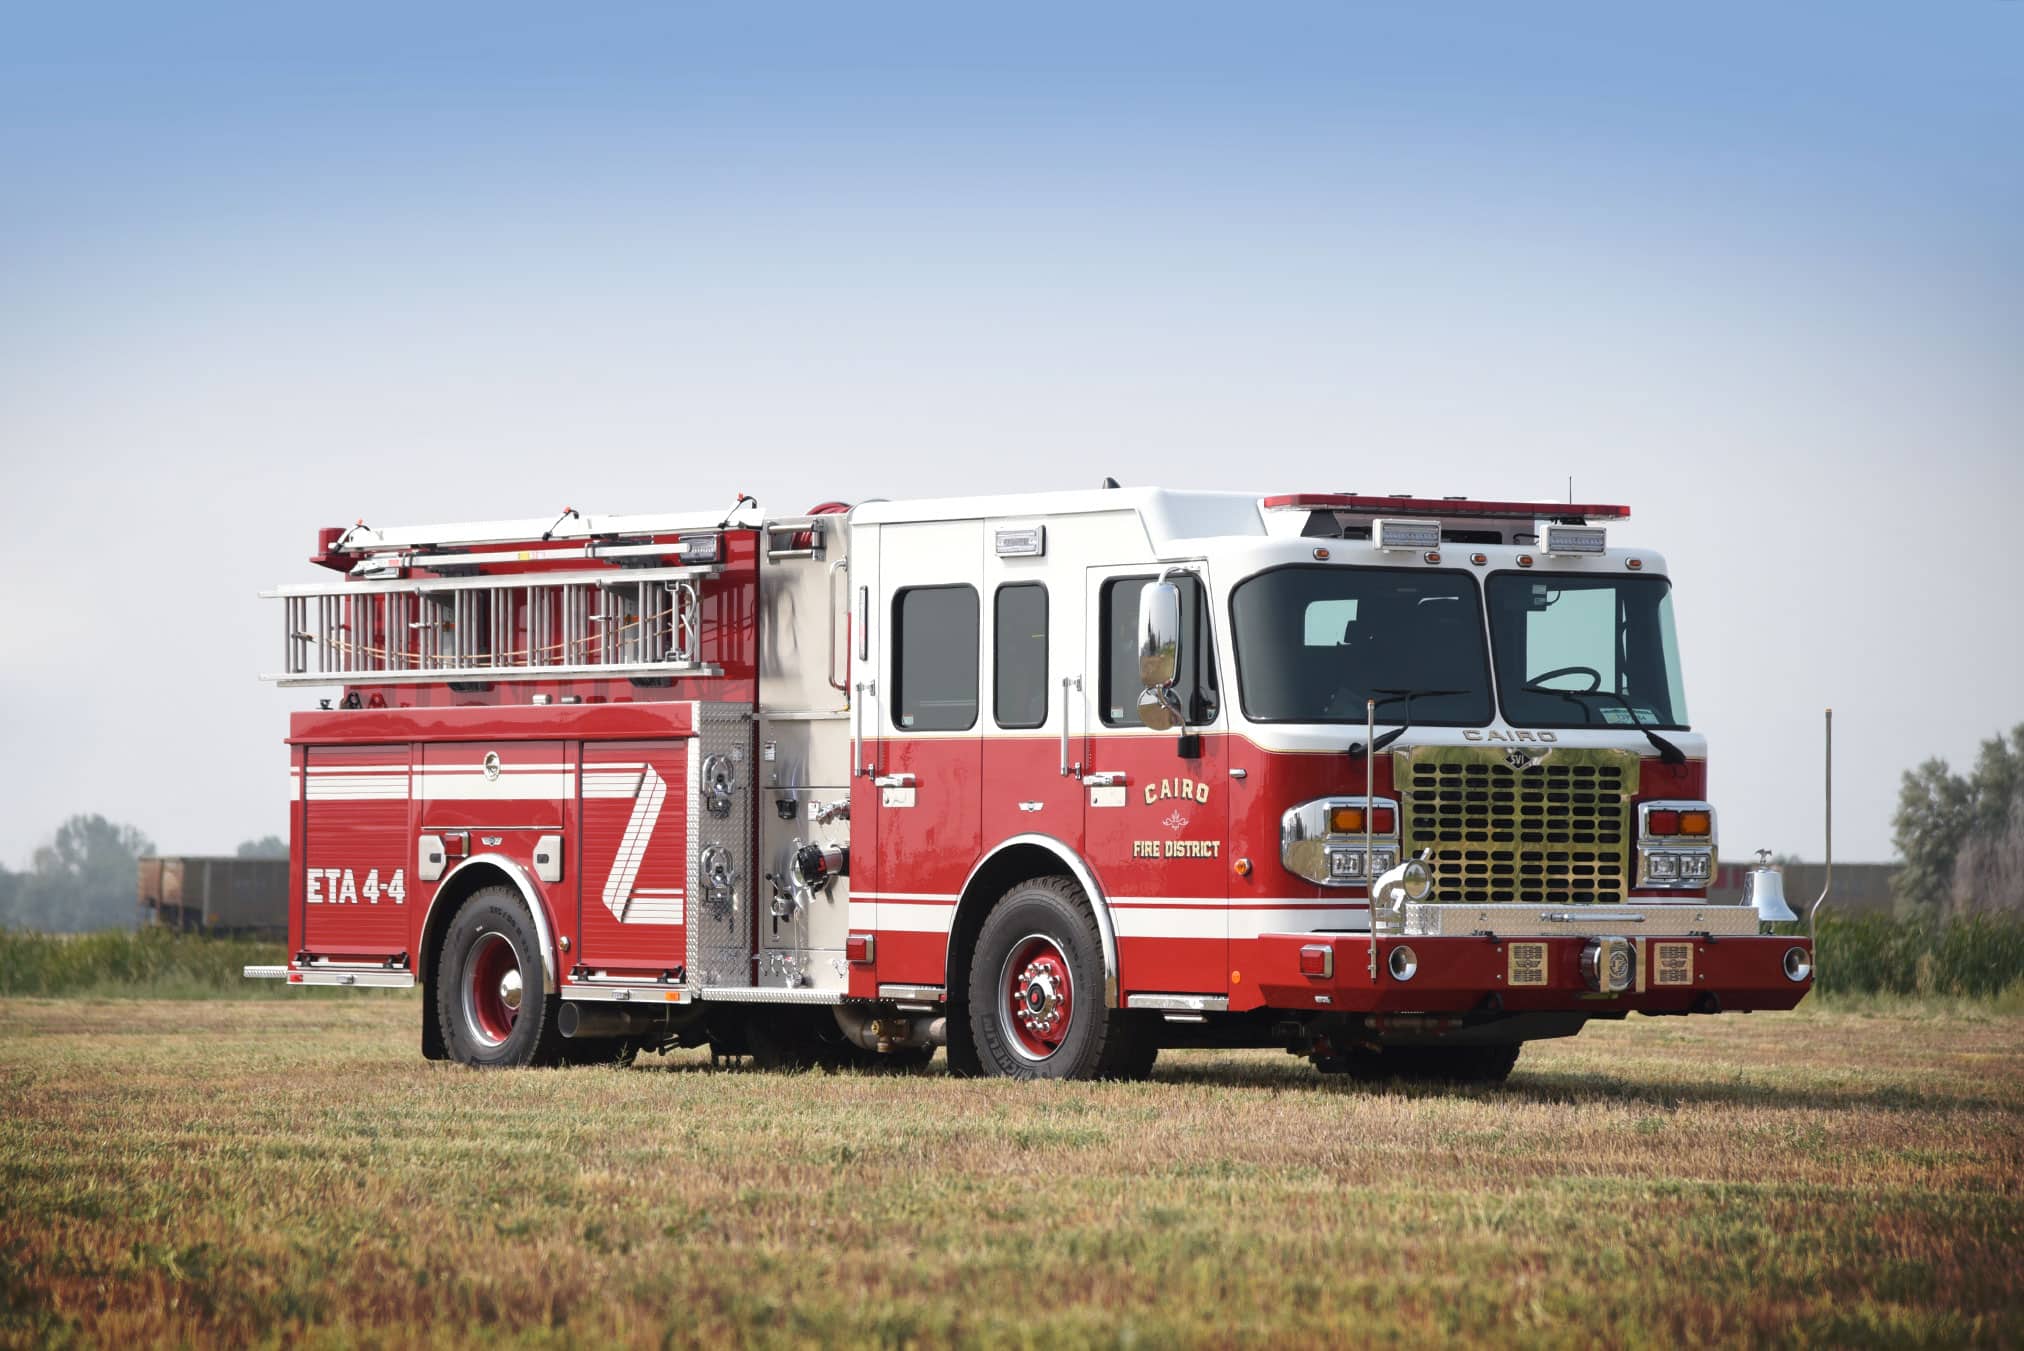 Featured image for “Cairo, NY Fire District Pumper #1129”